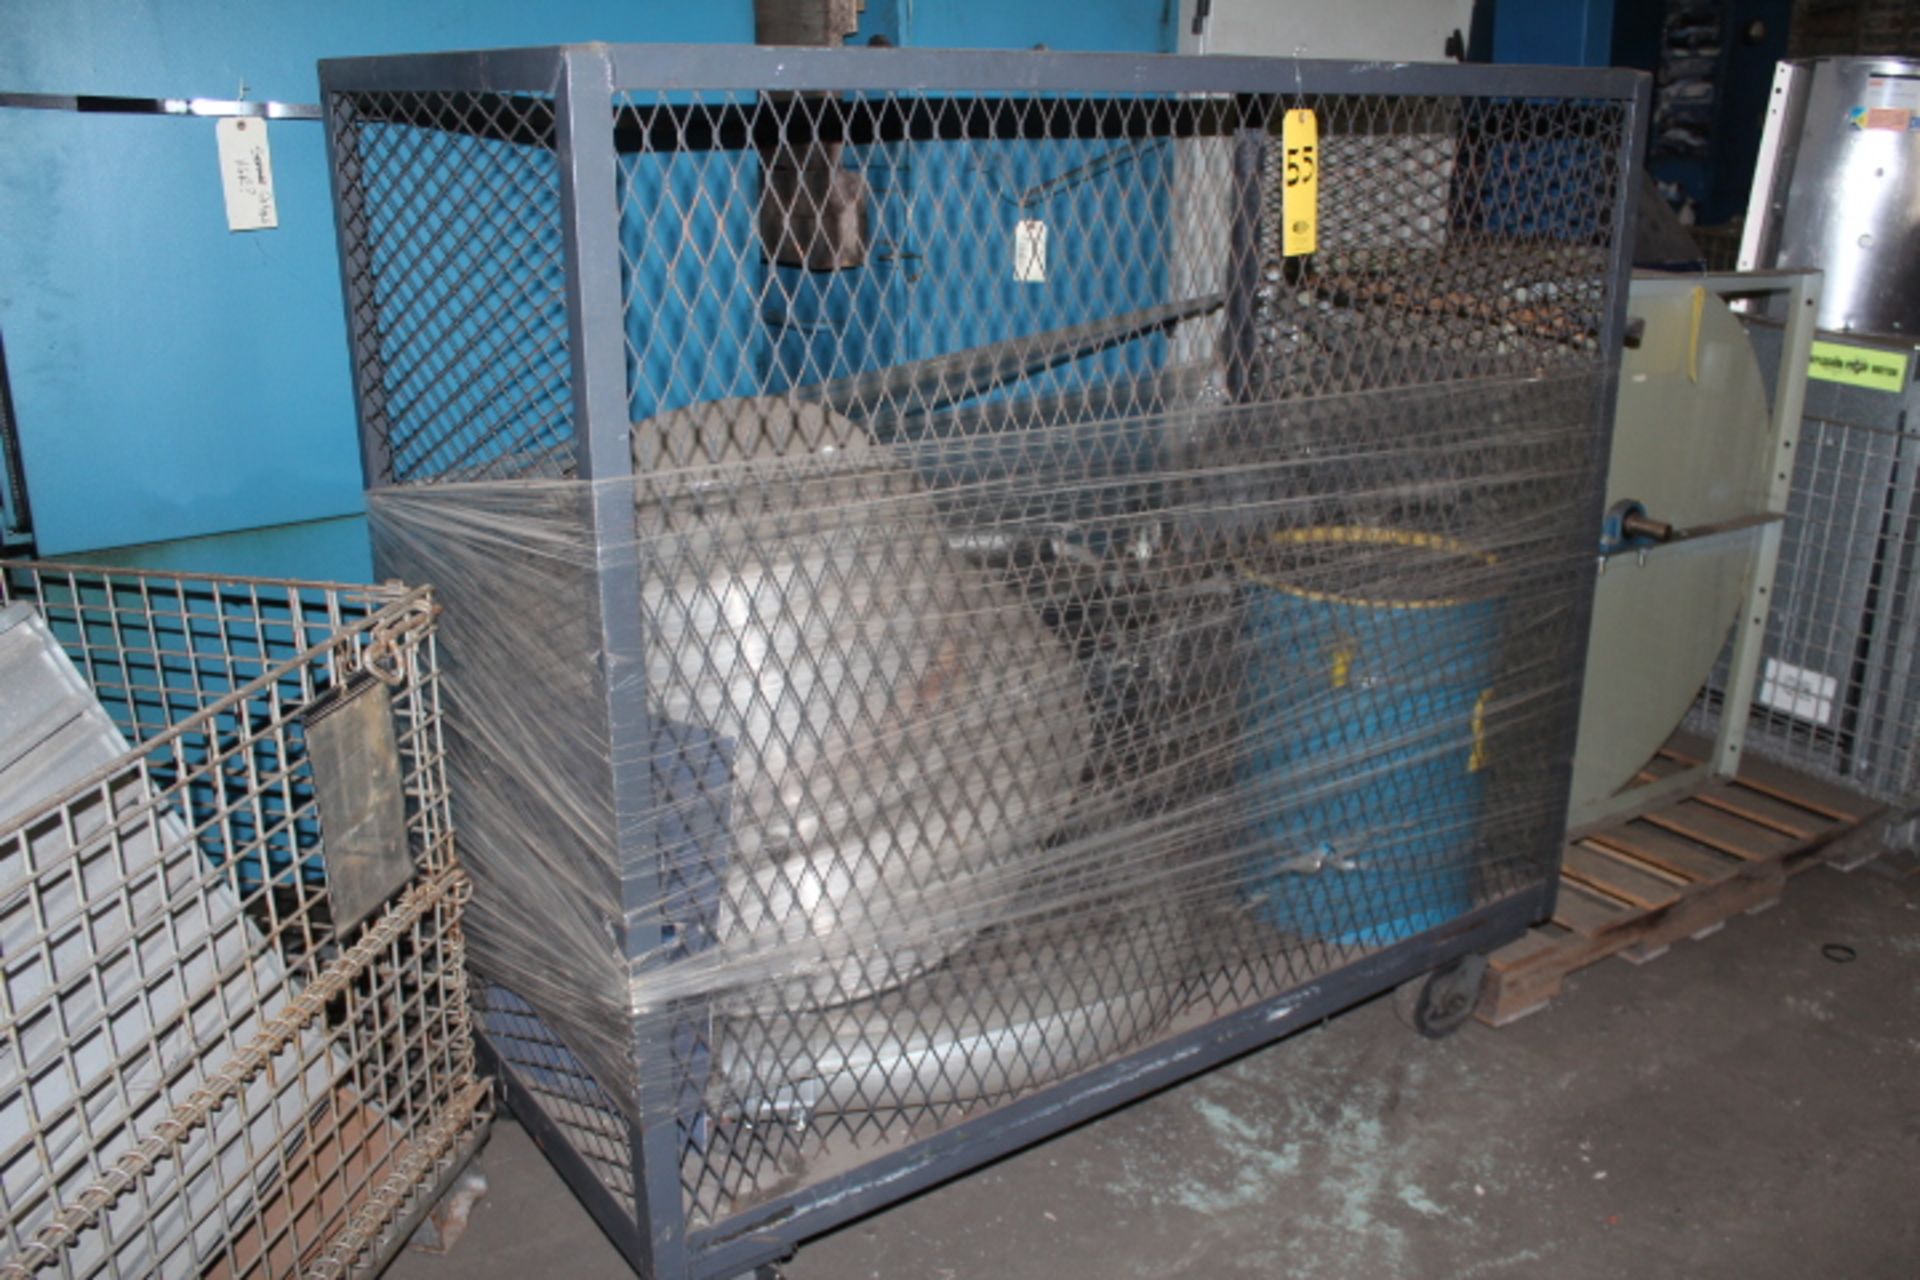 PORTABLE STEEL STOCK CART WITH STEEL MESH SIDES AND CONTENTS